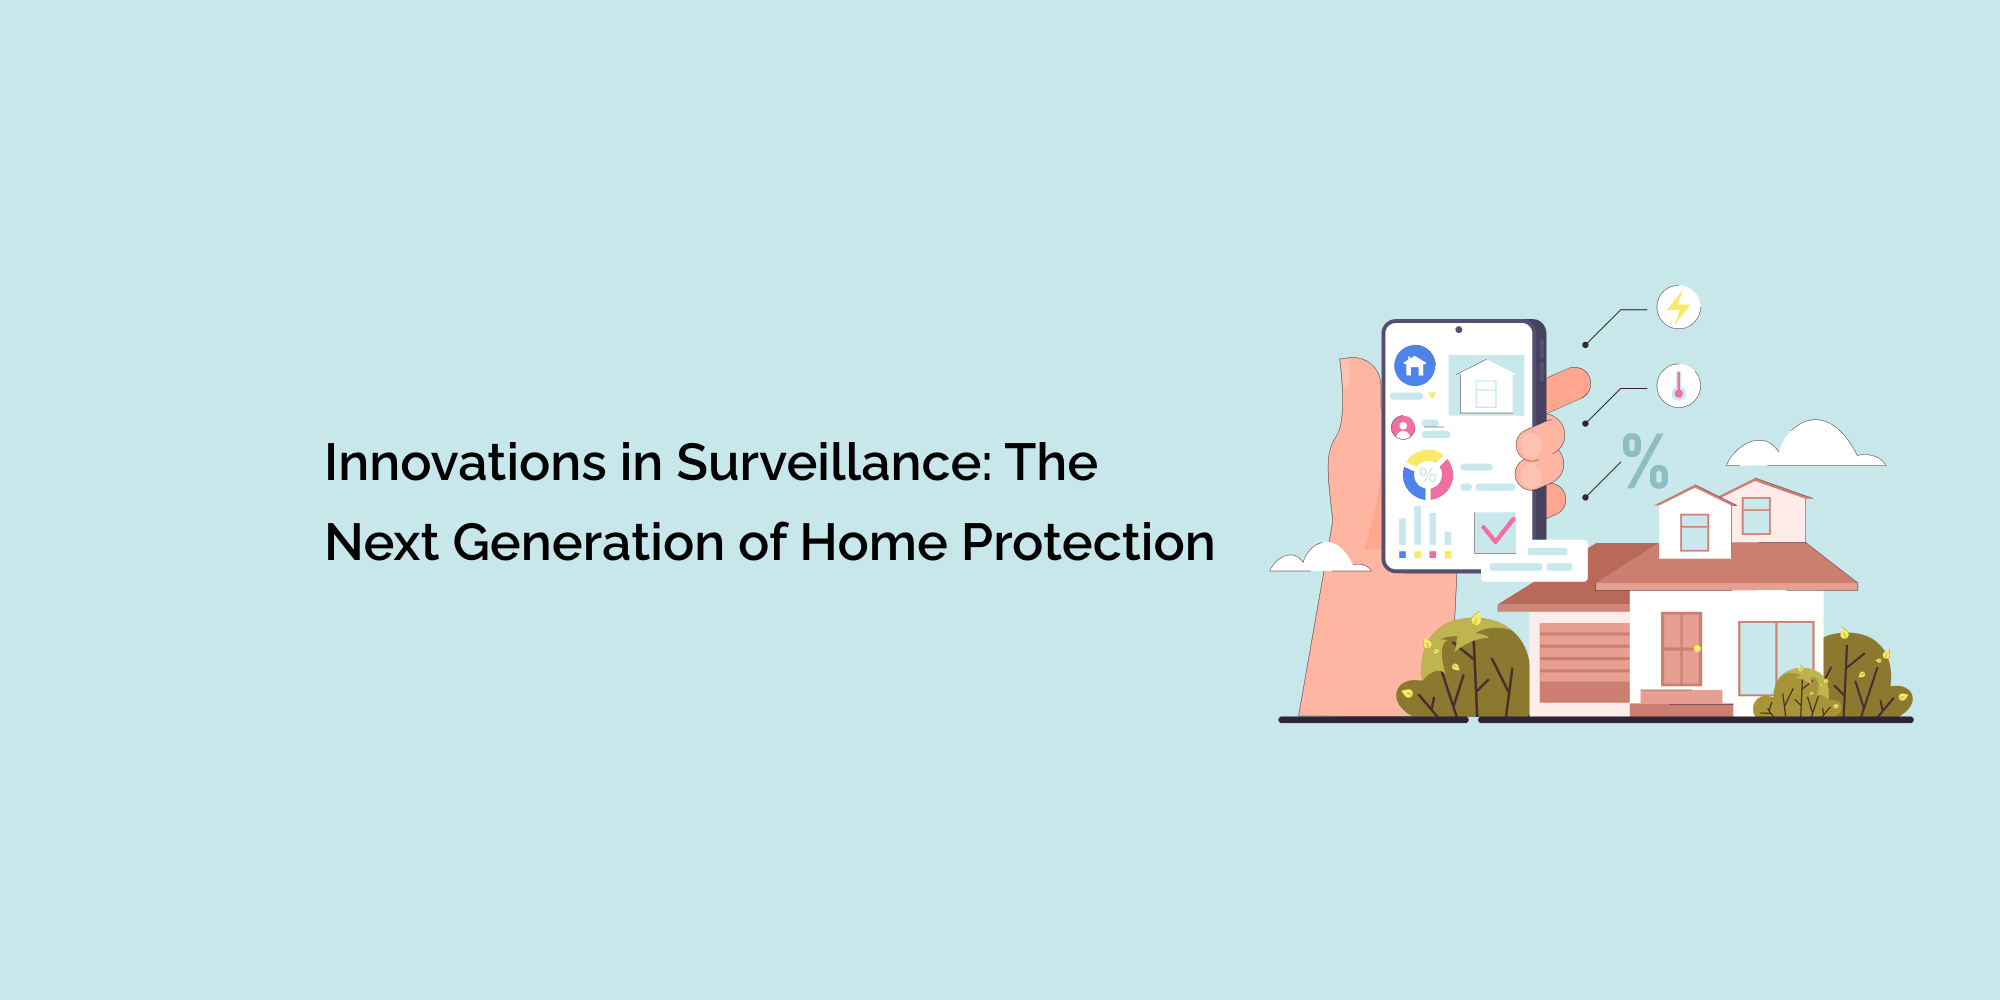 Innovations in Surveillance: The Next Generation of Home Protection